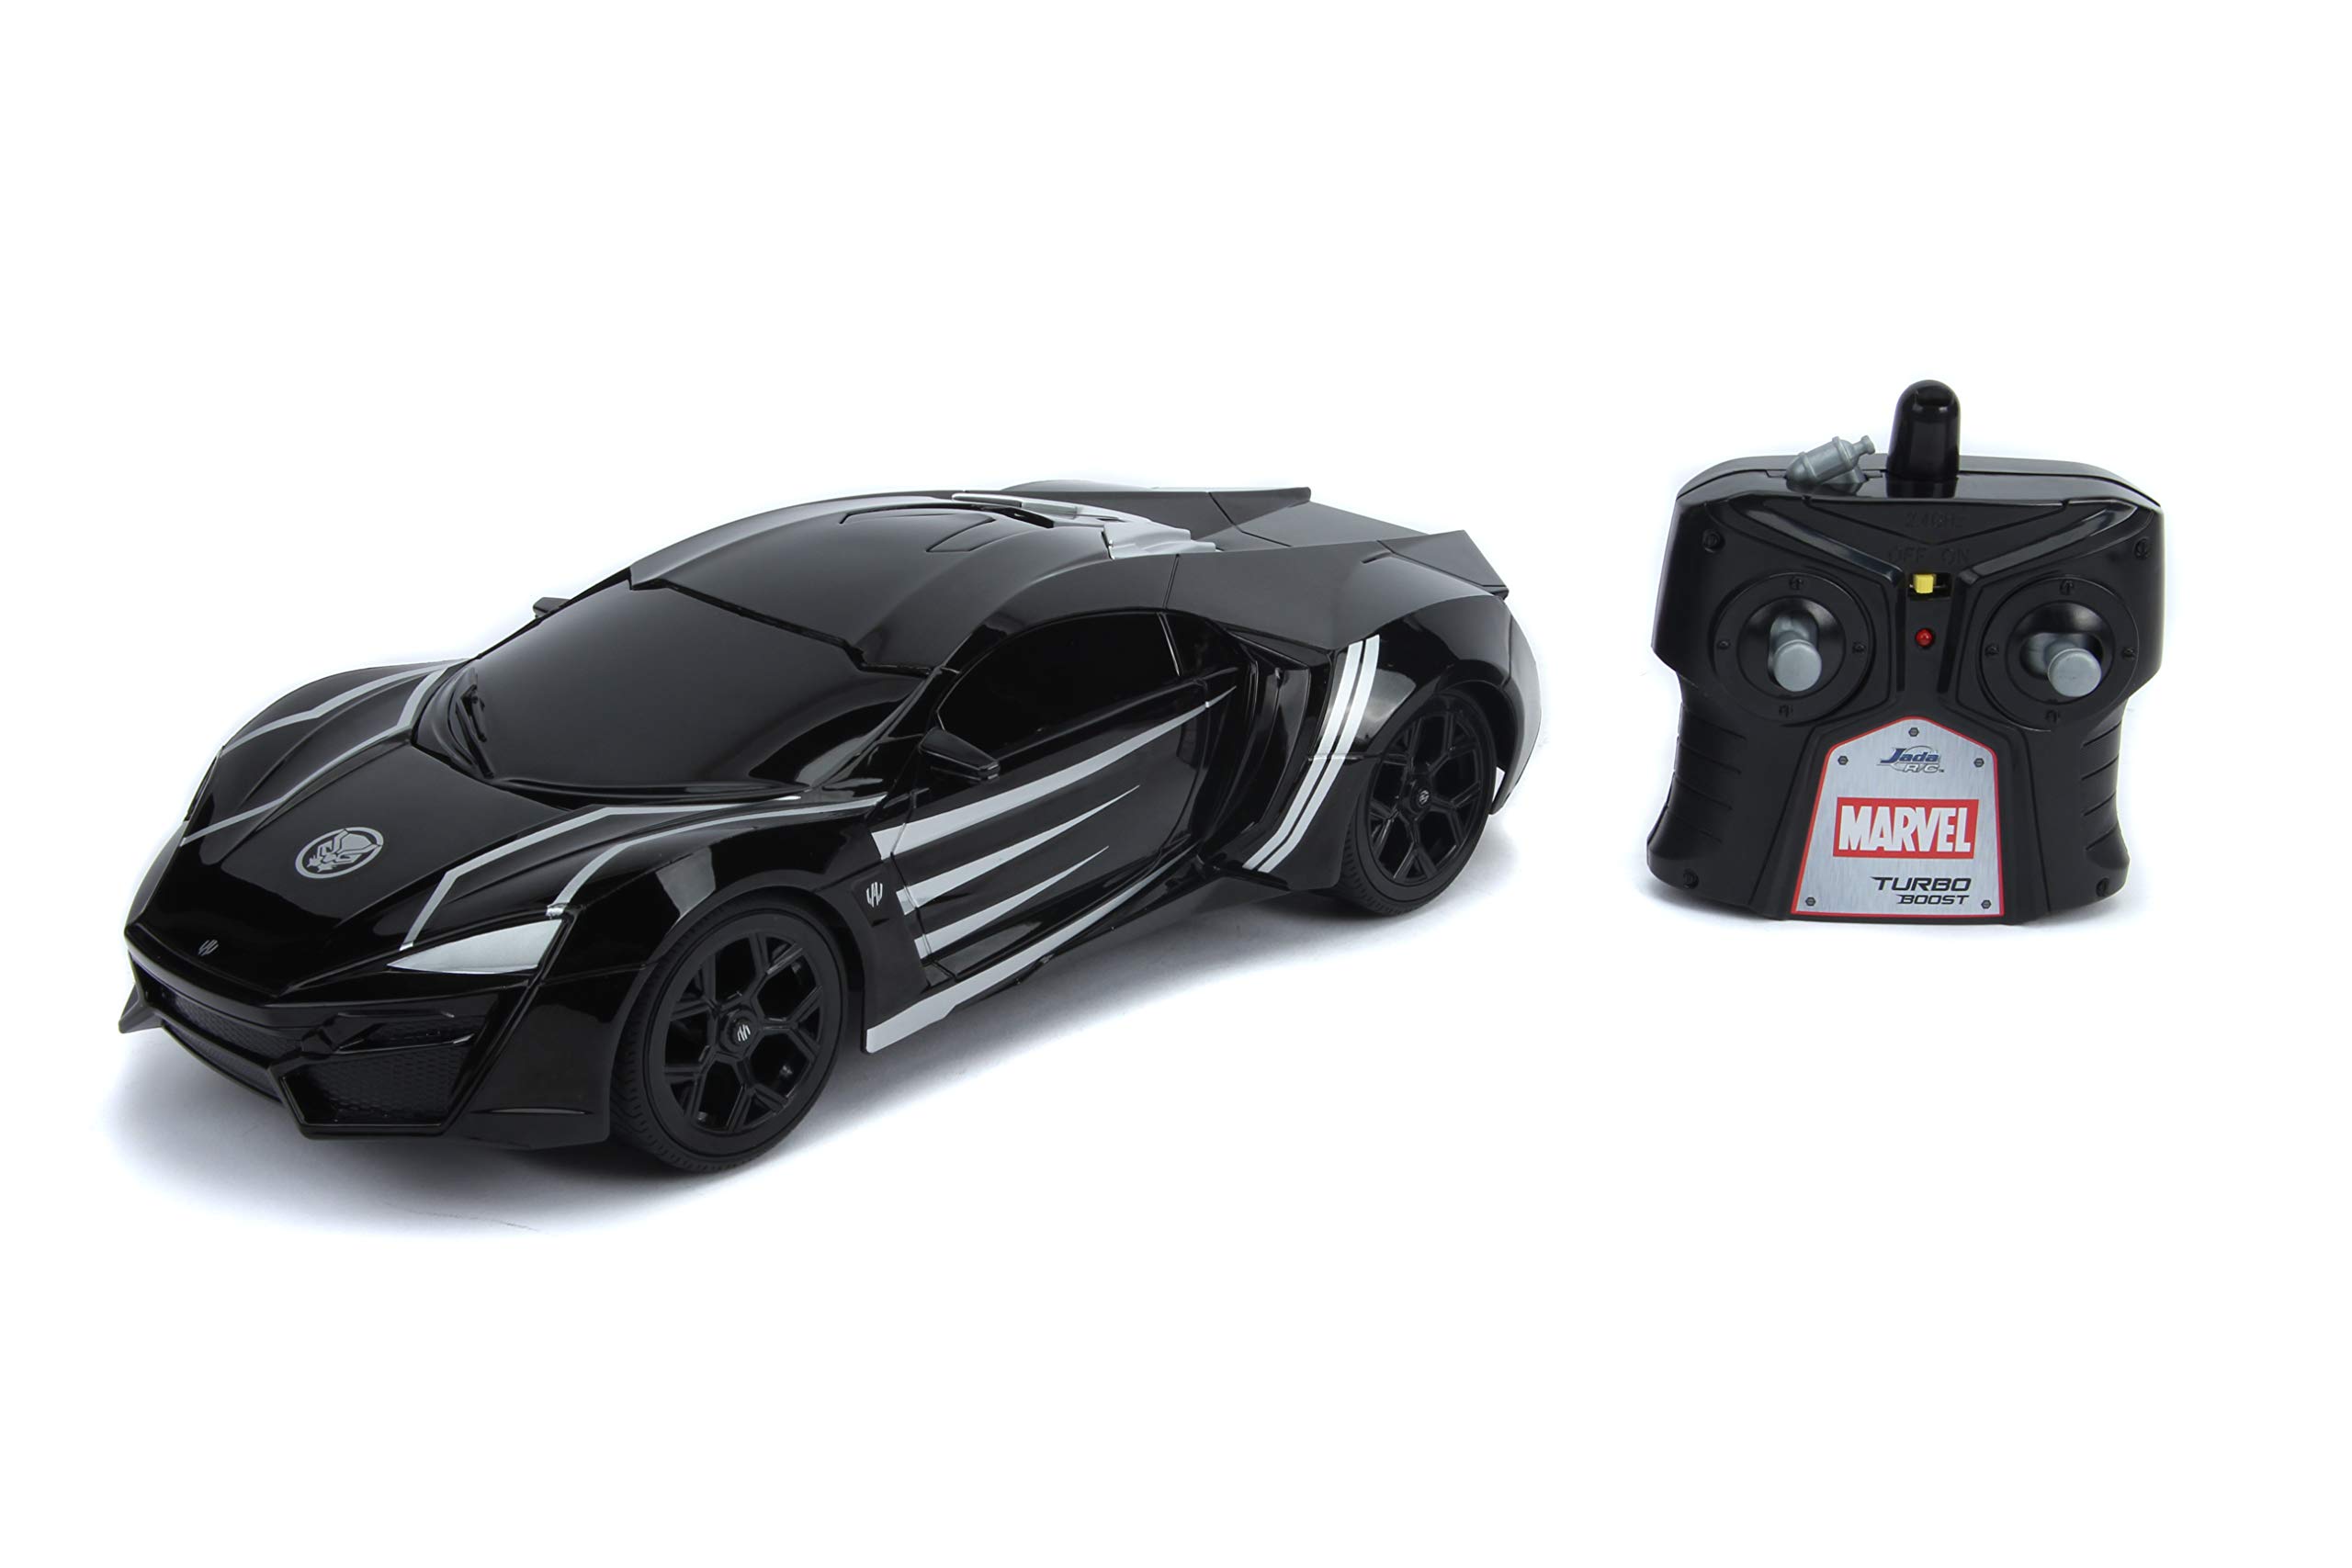 Marvel Black Panther 1:16 Lykan Hypersport RC Car w/ 2-AA Batteries $7.60 + Free Shipping w/ Prime or on $35+